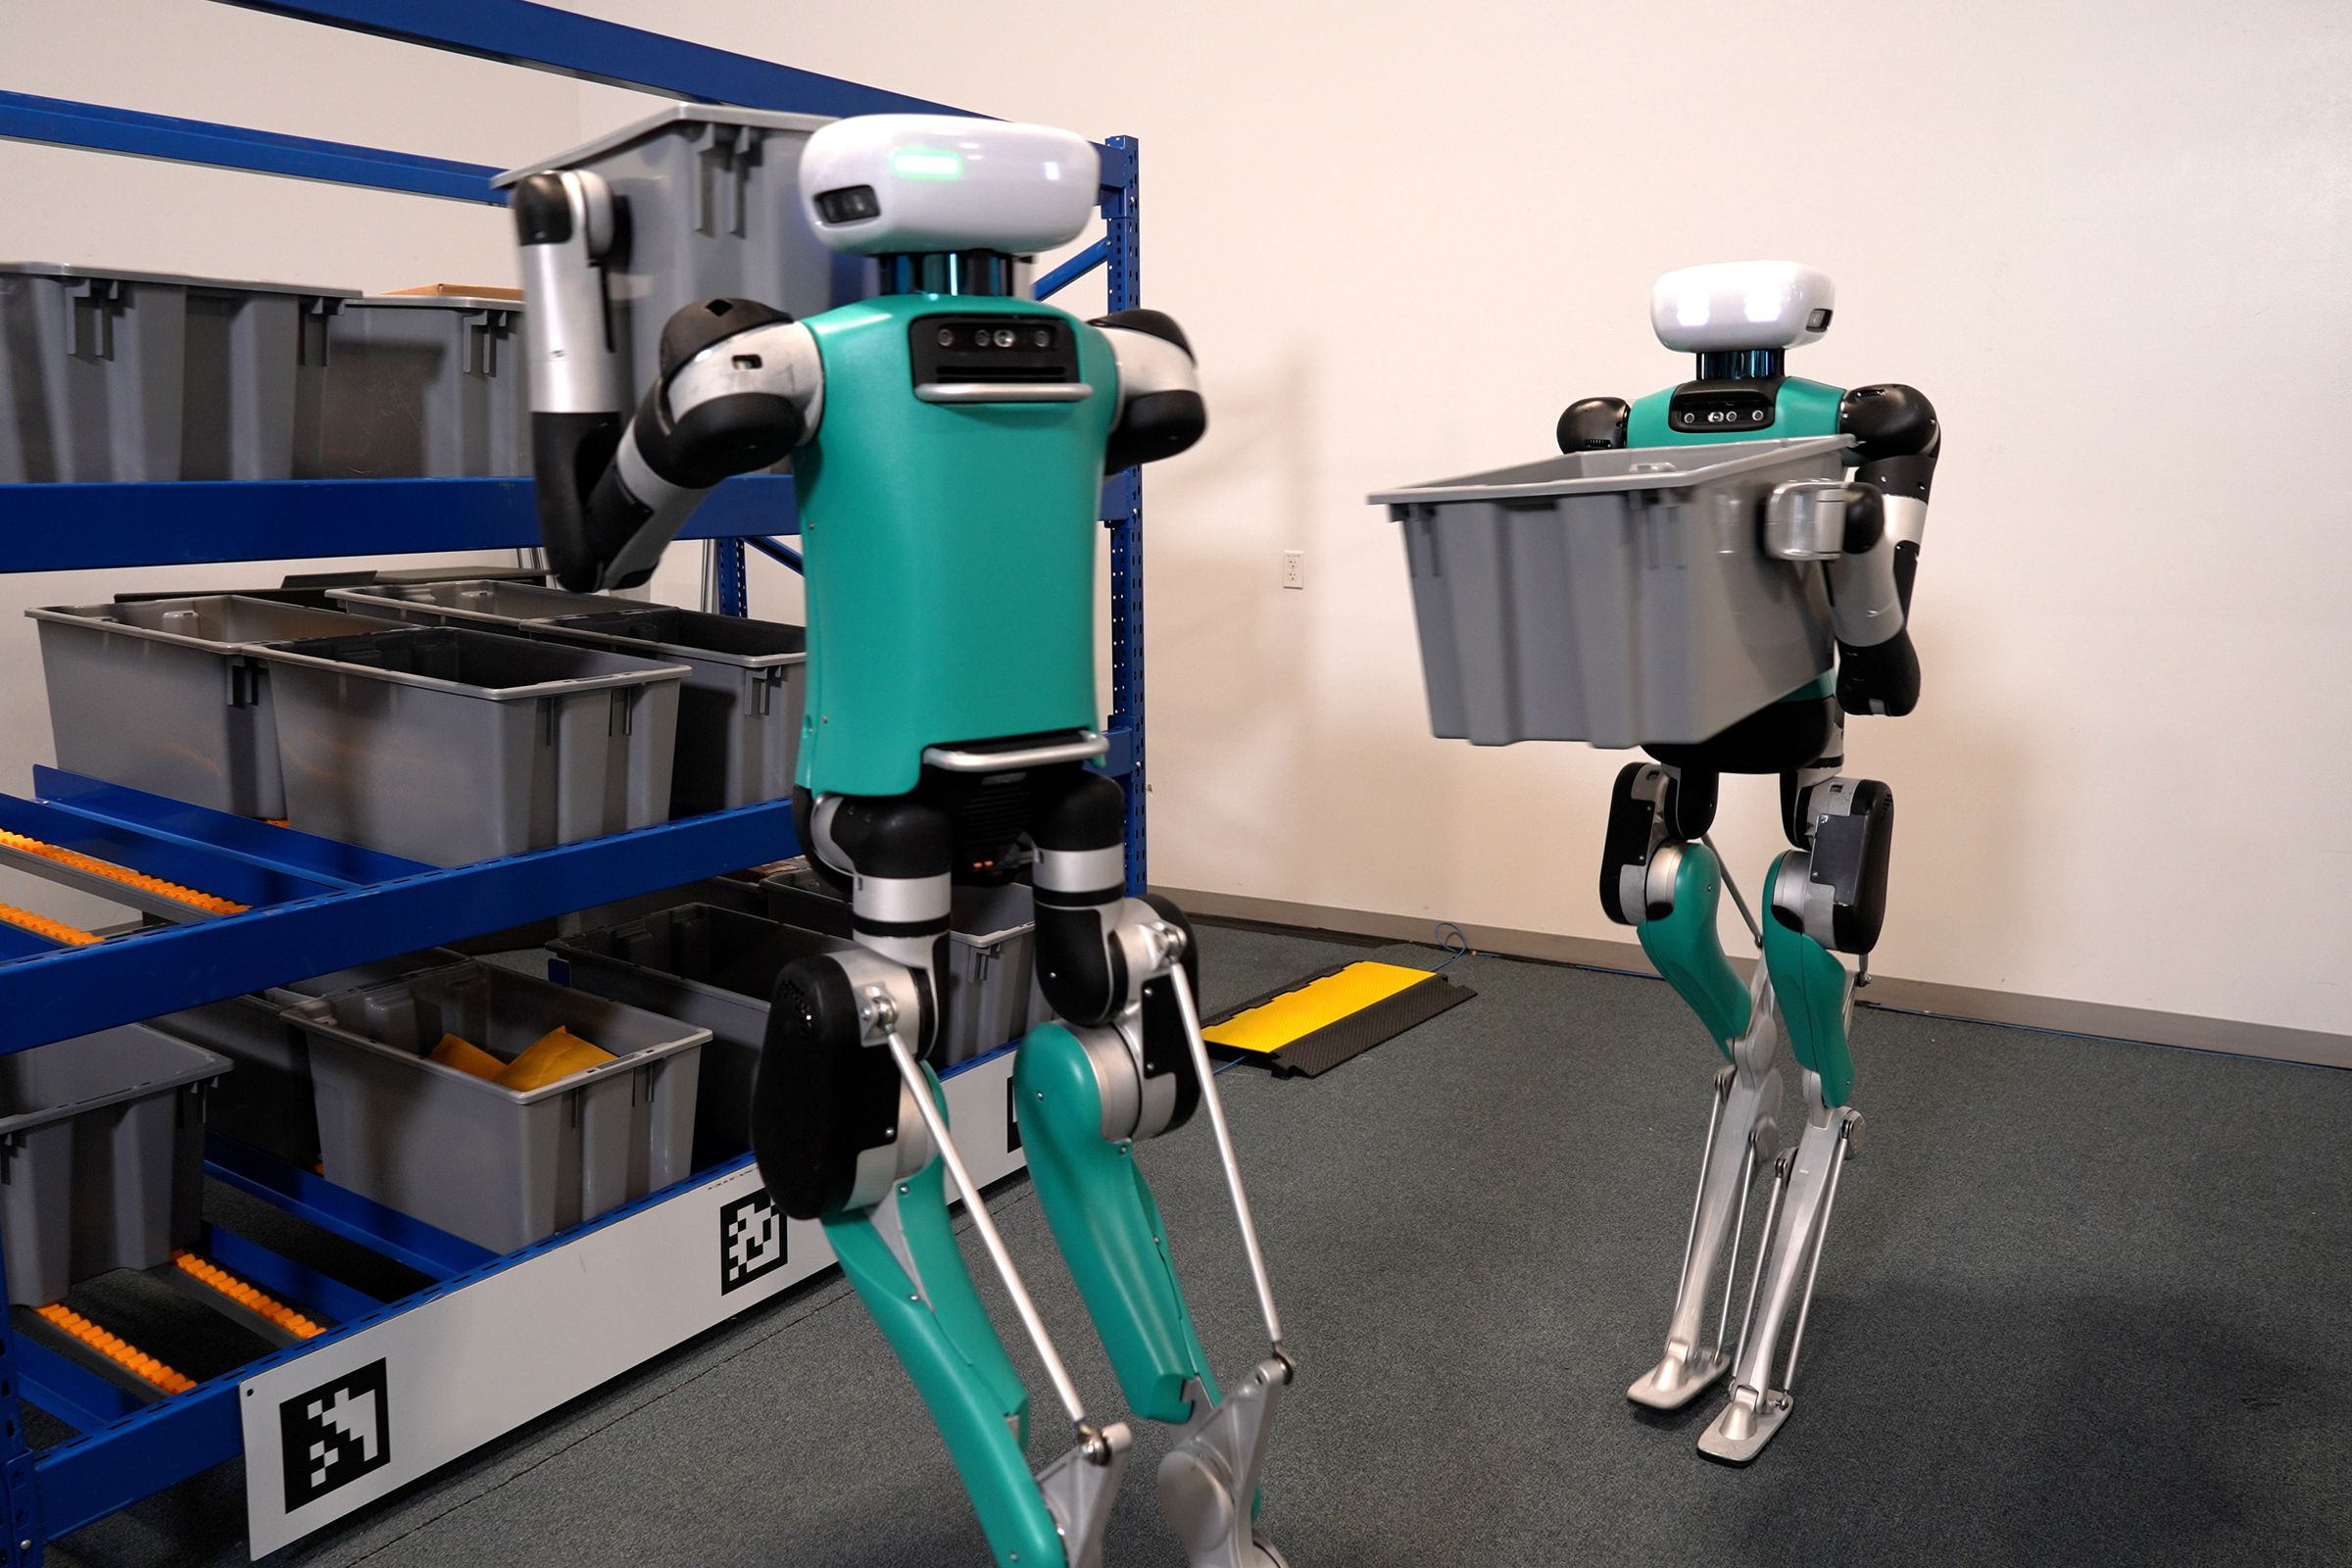 An image showing two robots in a warehouse, with one carrying a plastic bin and the other taking one off of a shelf